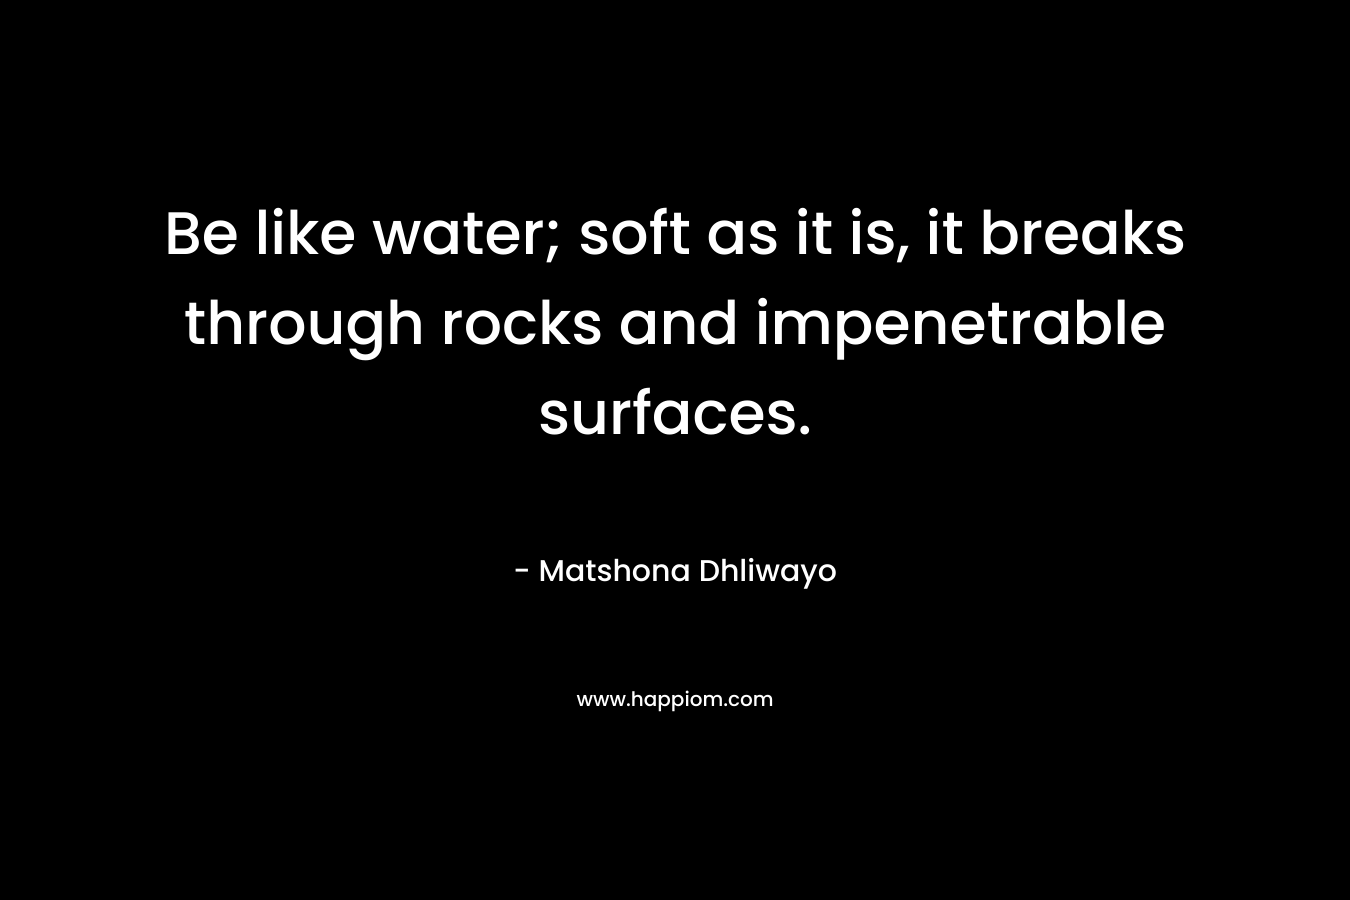 Be like water; soft as it is, it breaks through rocks and impenetrable surfaces.